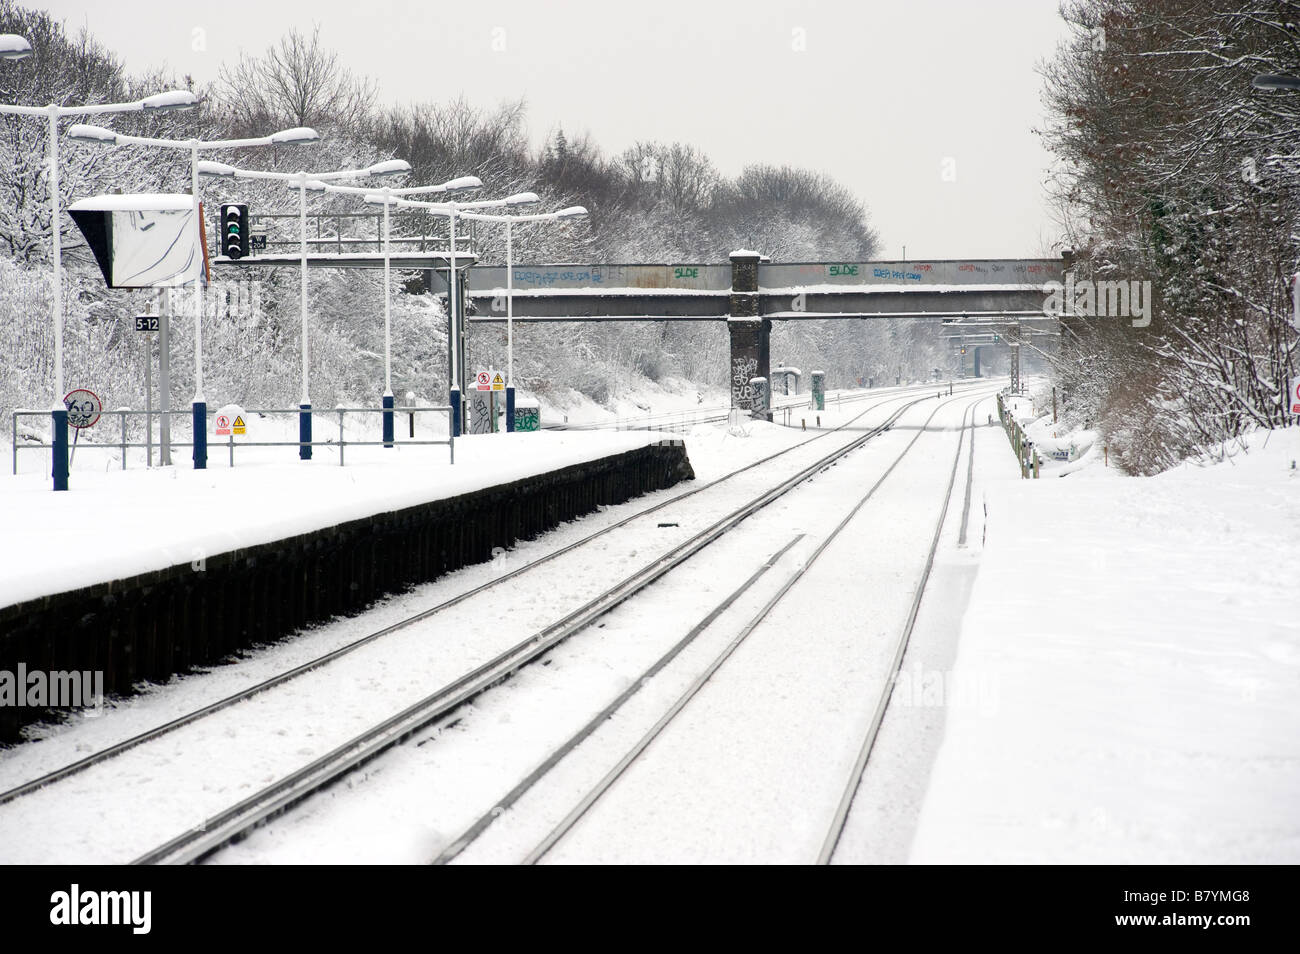 A snow covered railway line and station platform Stock Photo